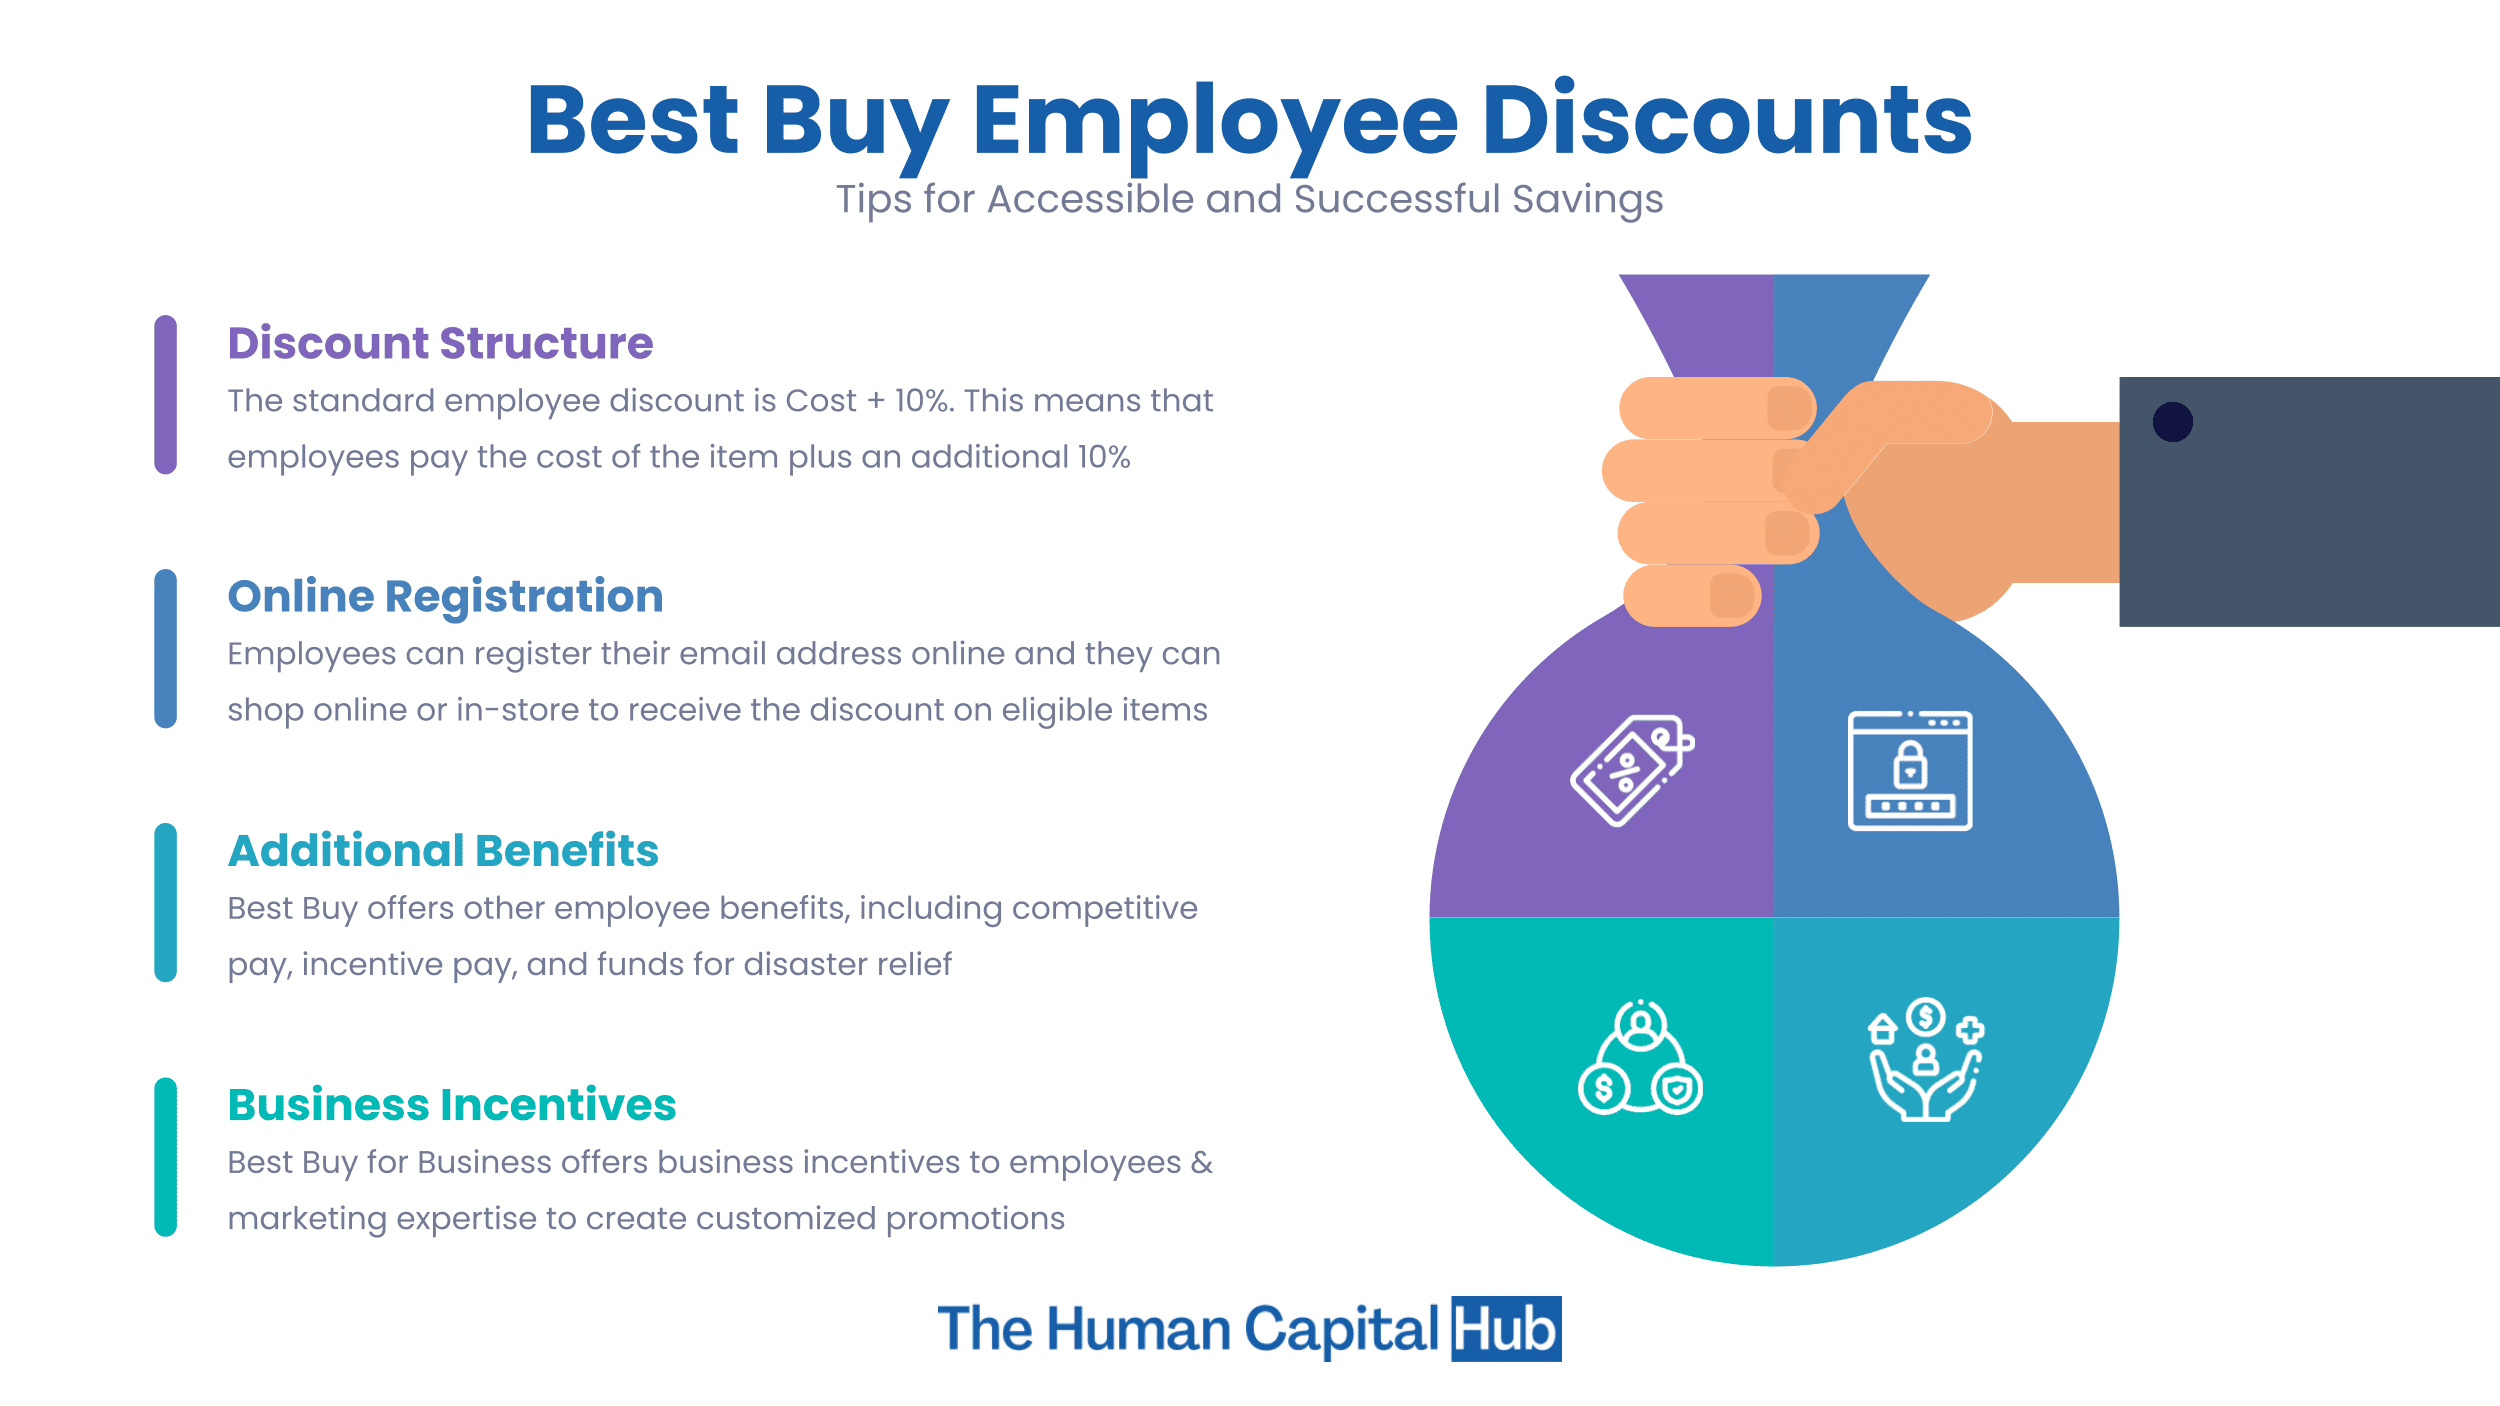 Best Buy Discounts for Employees All You Need to Know